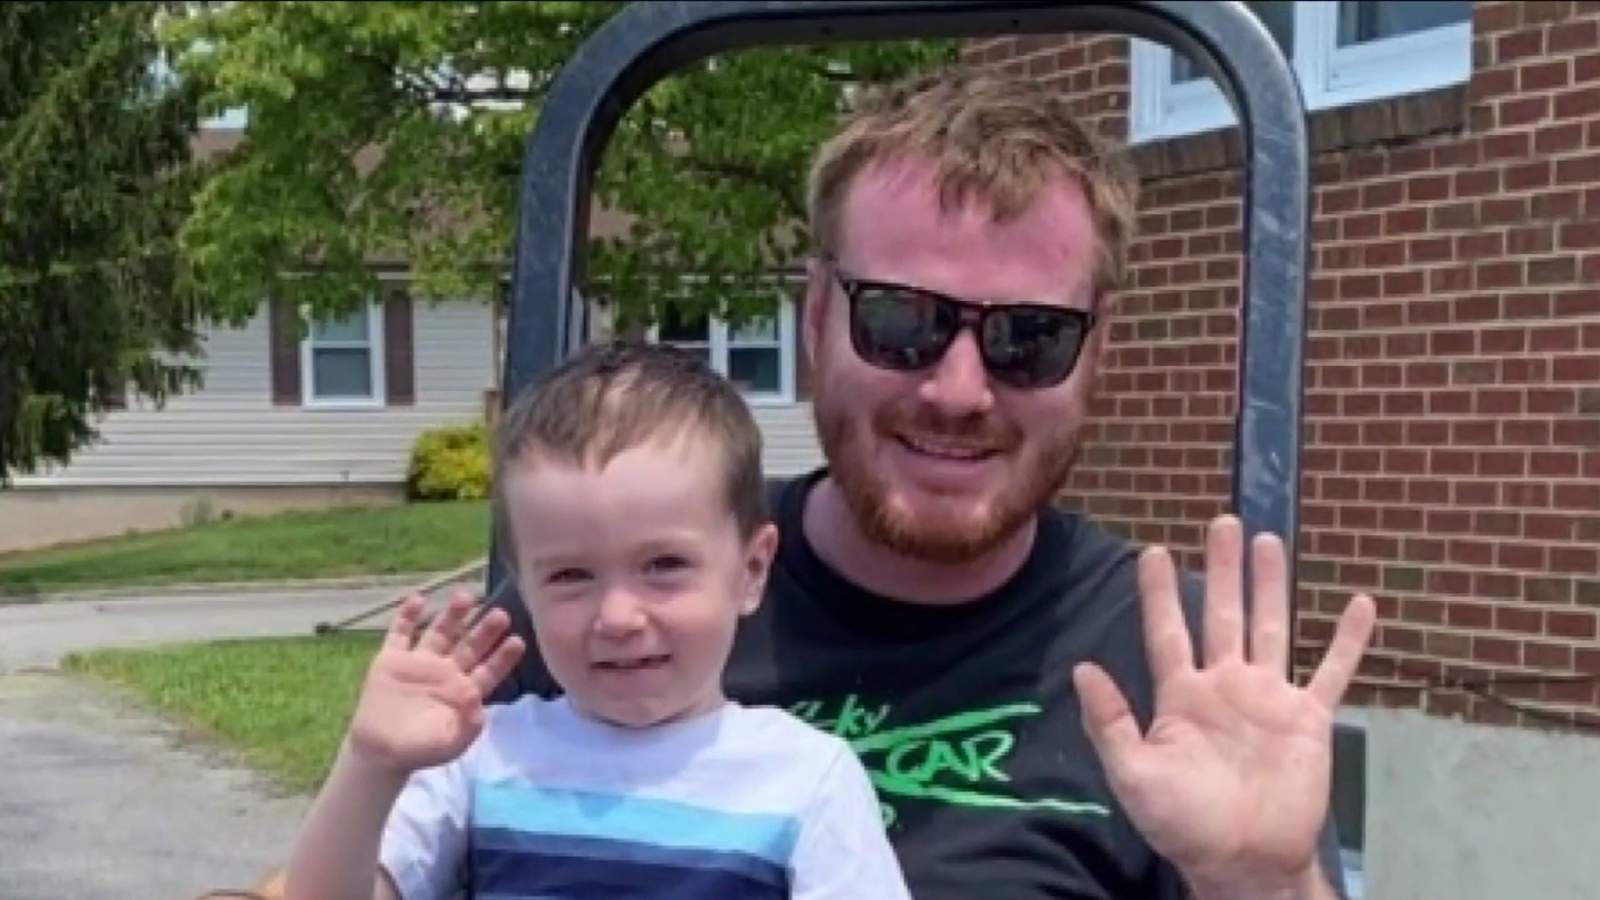 Airsoft club raises money for father mourning death of 3-year-old son